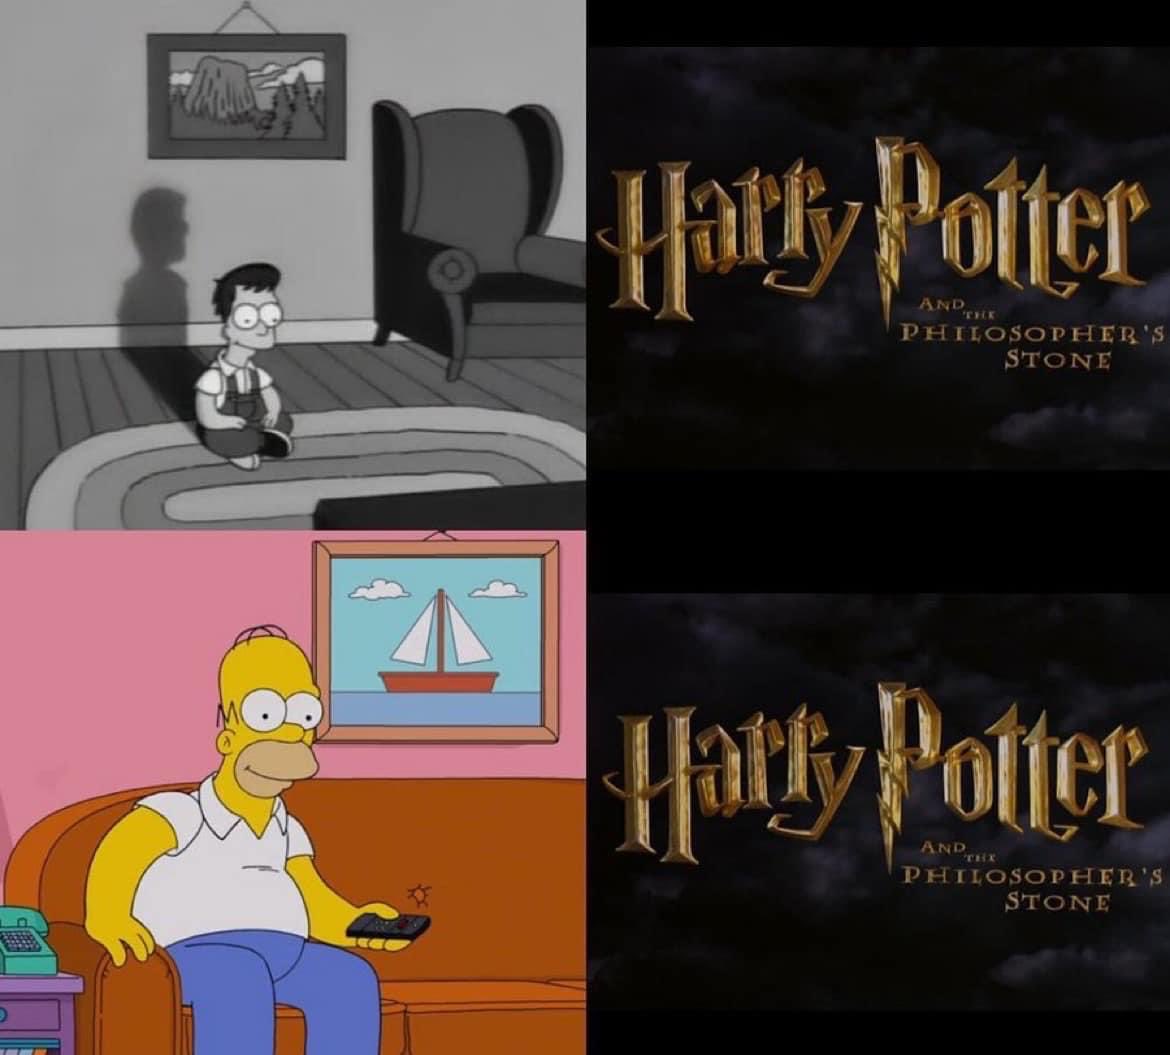 Me as a child with the Harry Potter series vs me now as an adult watching it. ⚯⚡️👀❤️💙💛💚🚂🔮🗡️🧹🦁
#HarryPotter #meme #HarryPotterIsLife